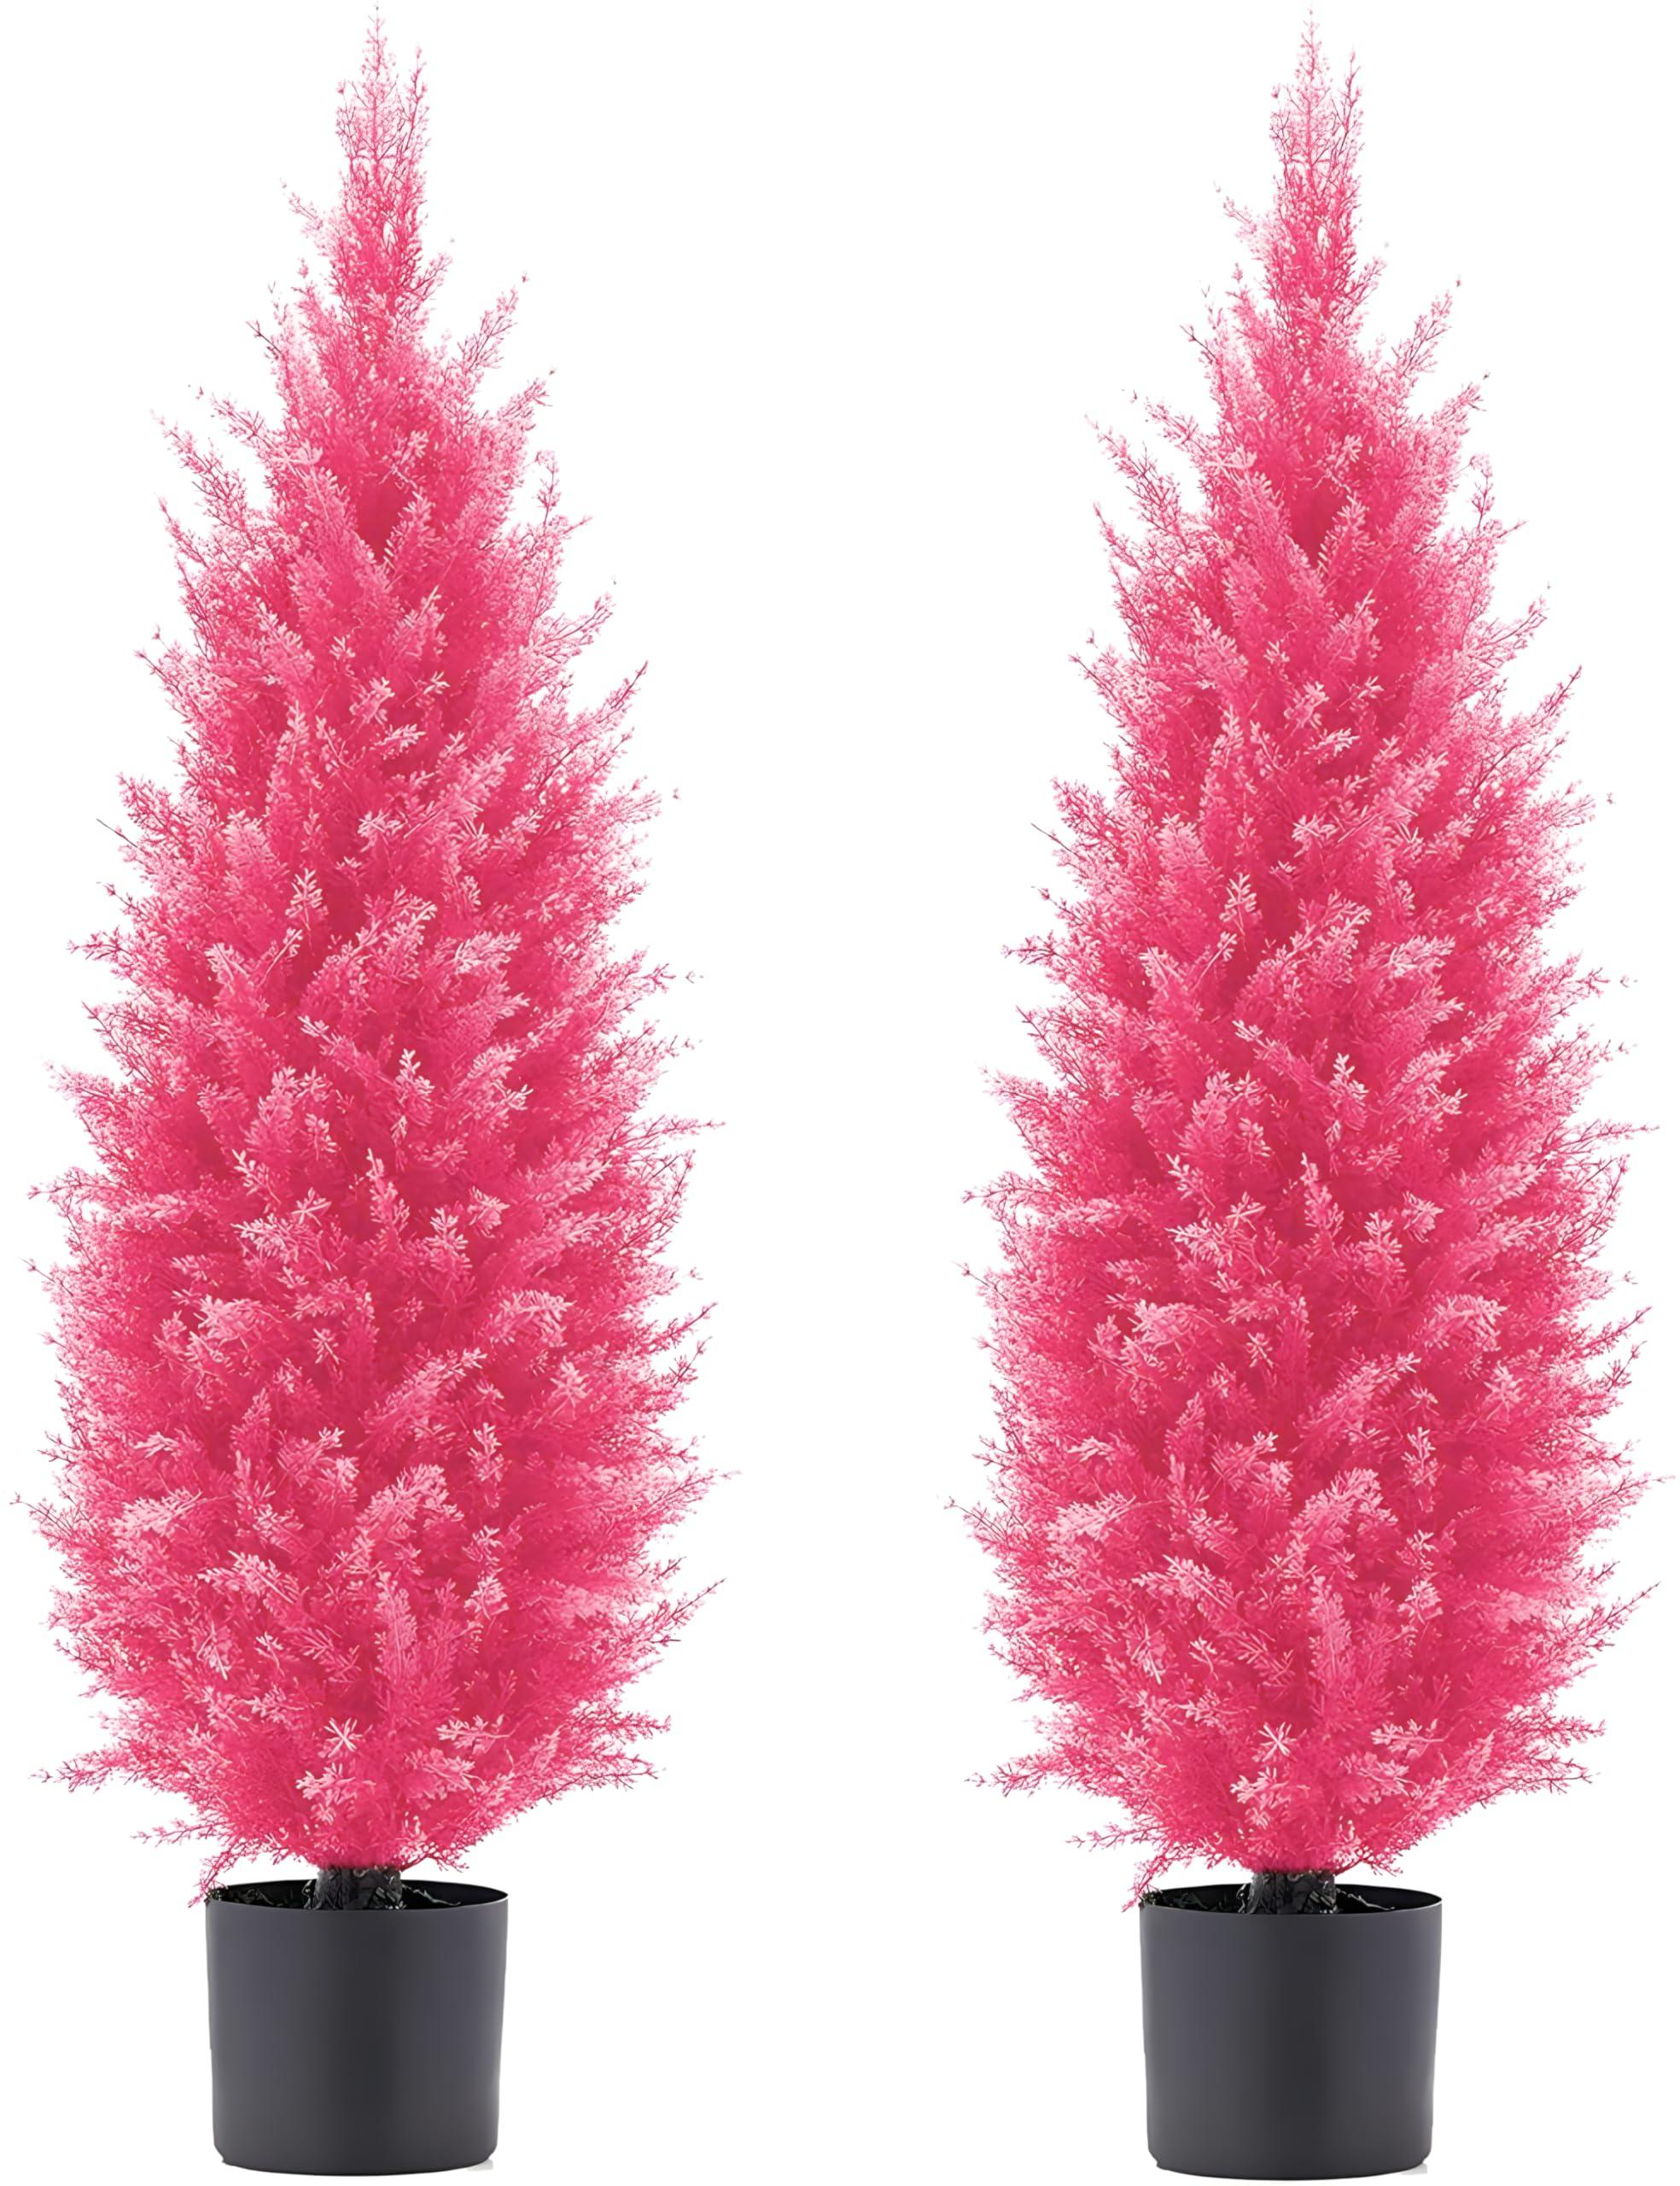 DLD Two unique meaningful trees 35-inch pink artificial Christmas tree decoration, indoor, family porch bedroom, carnival party, artificial shrub plants, Christmas, white beard Santa Claus.